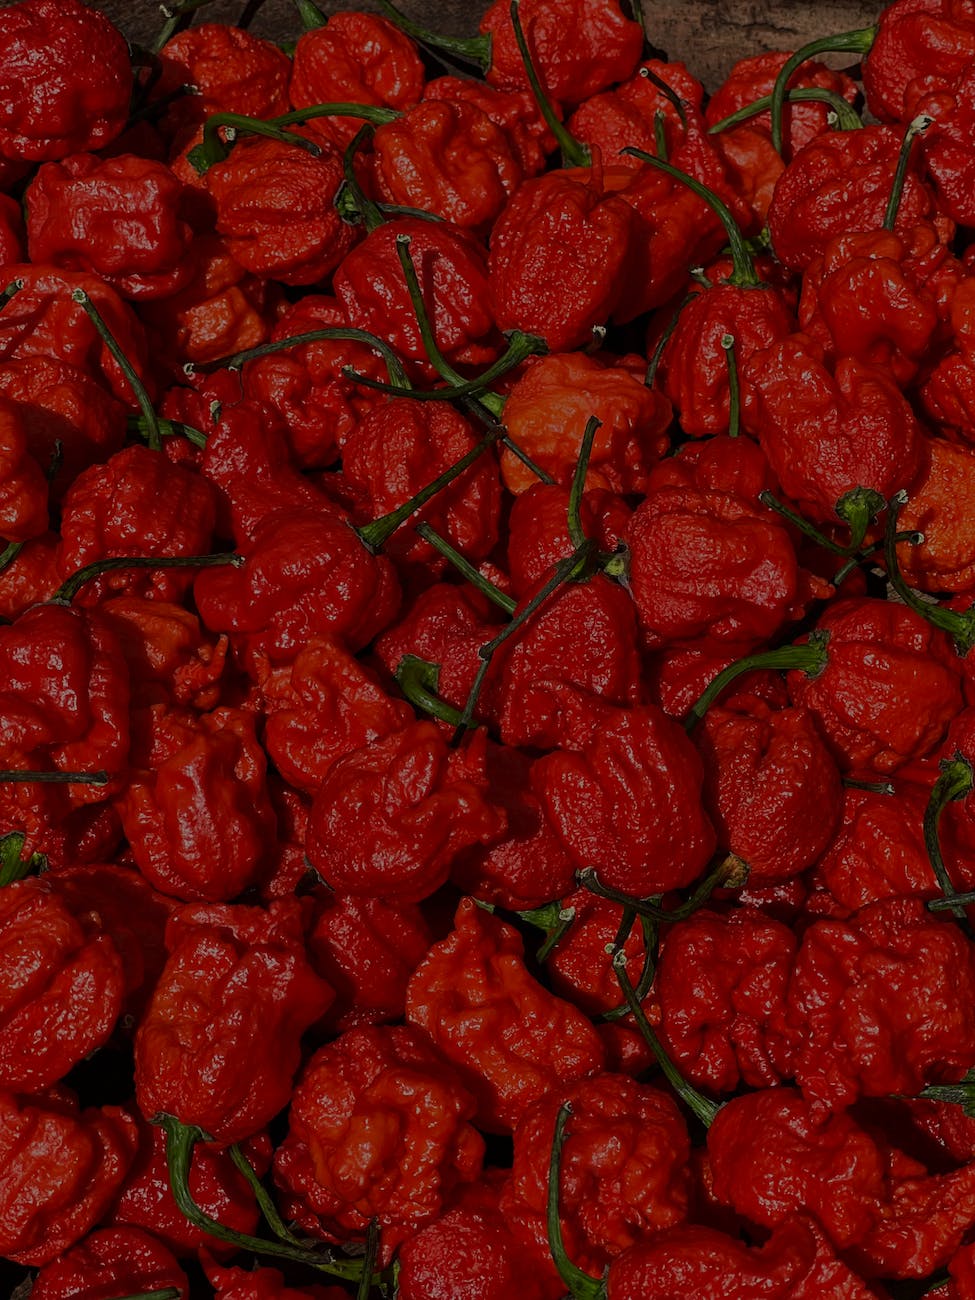 bunch of red chili peppers in close up photography